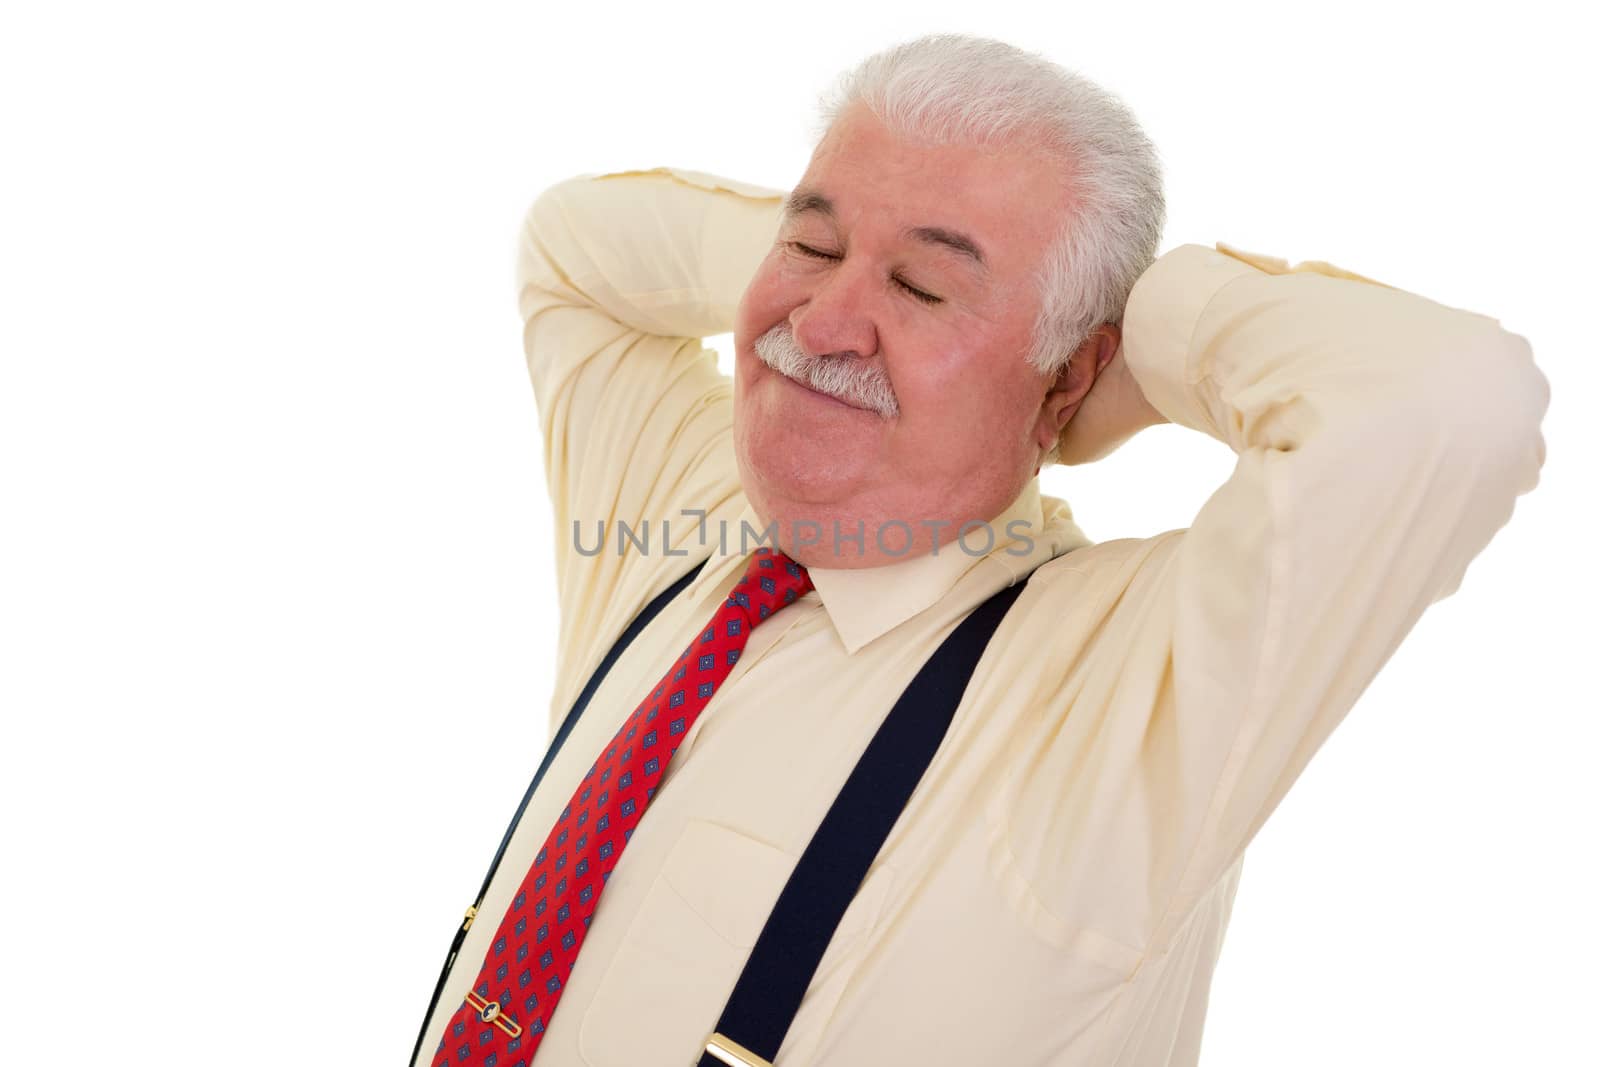 Contented grey-haired senior man with a moustache wearing suspenders relaxing with his hands behind his head and his eyes closed with a smile of satisfaction, on white